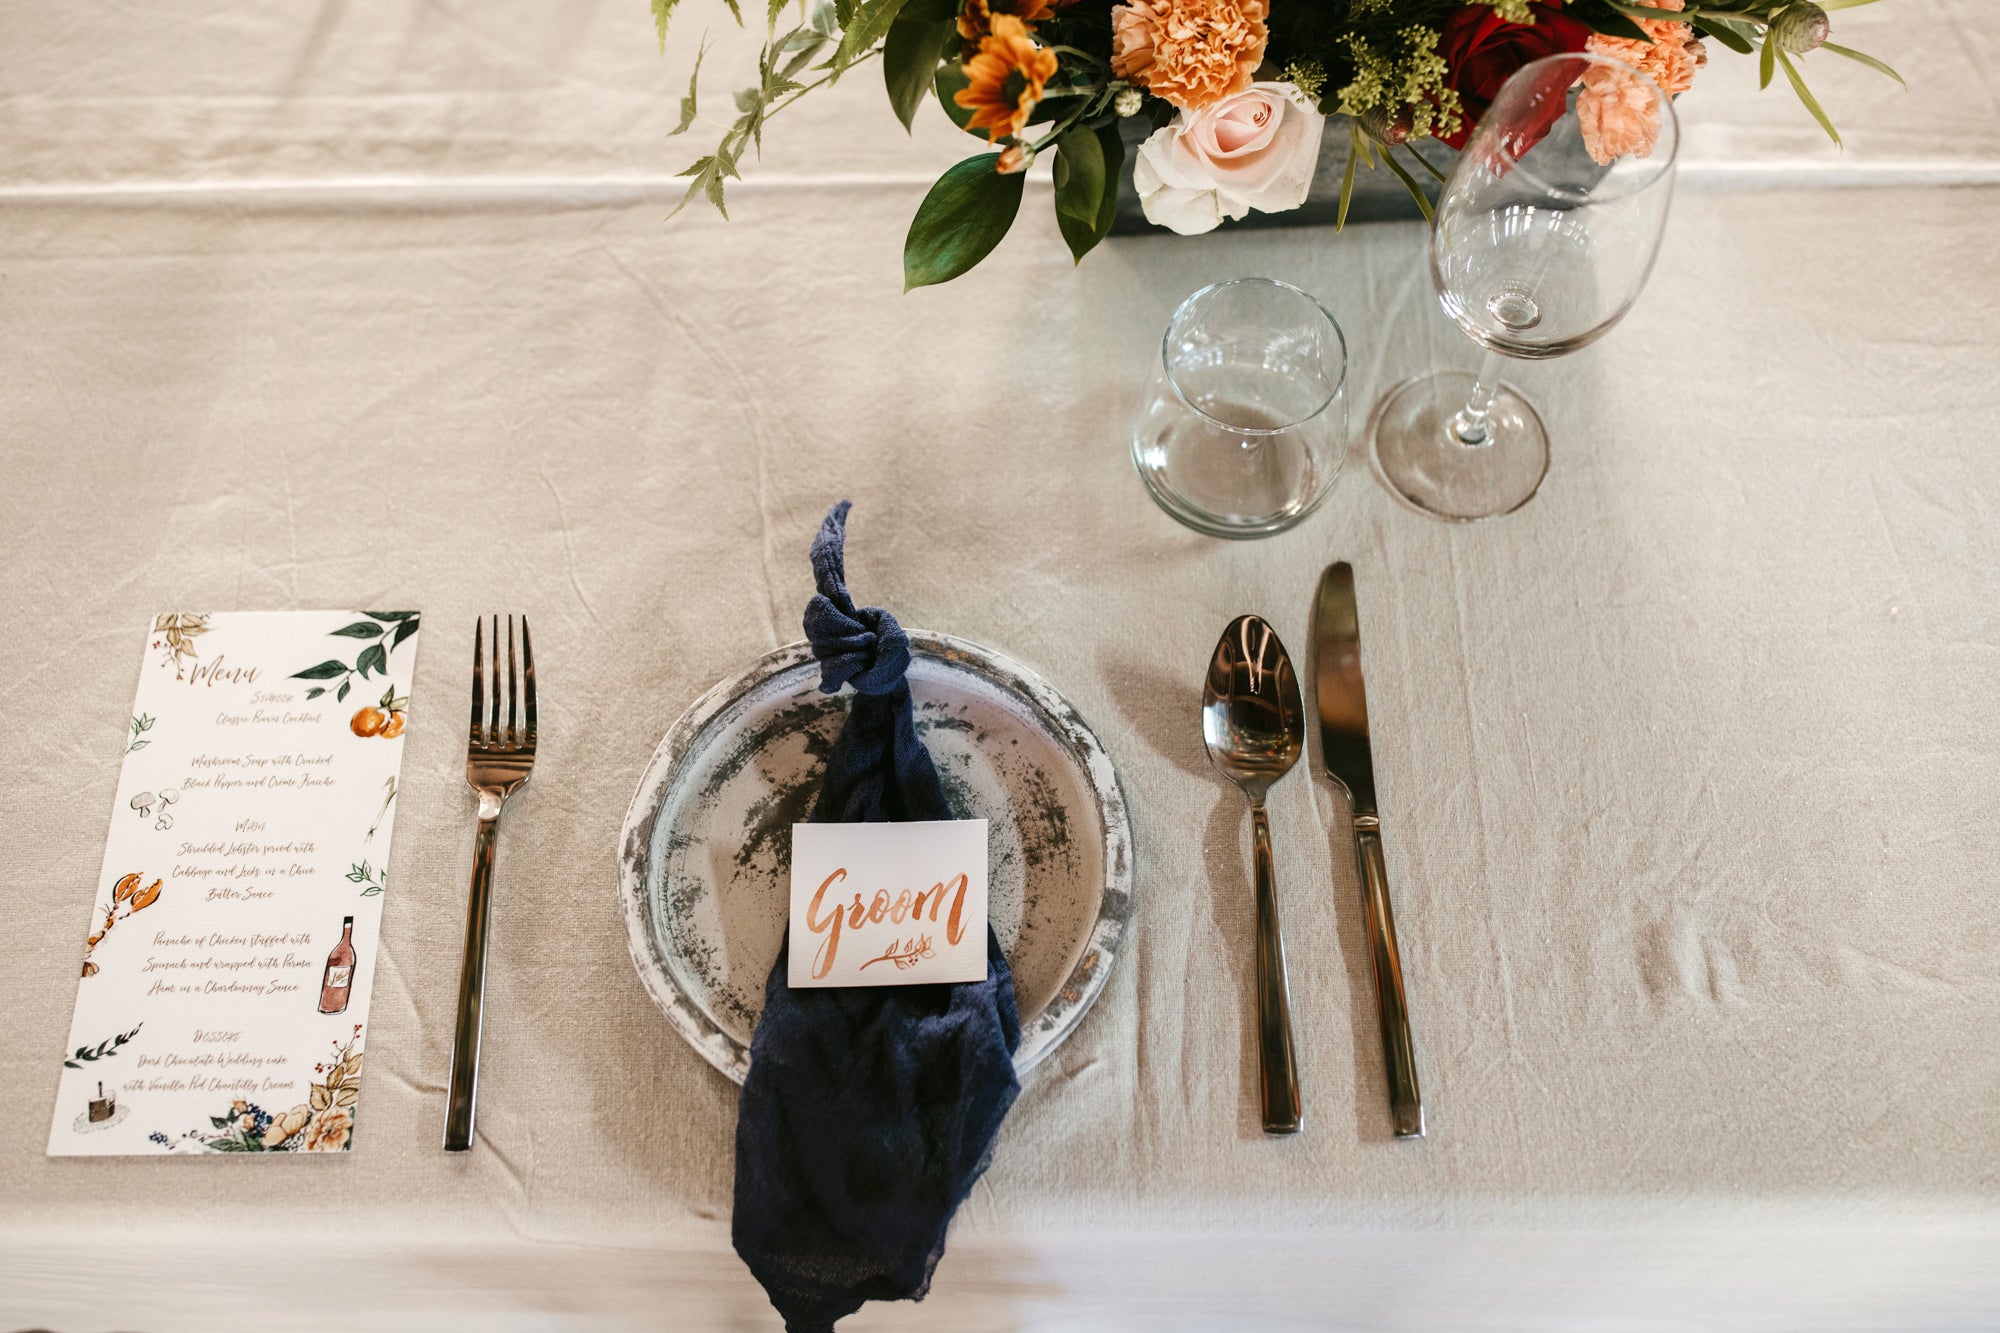 Pottery place setting at a wedding with navy linen and watercolour place cards